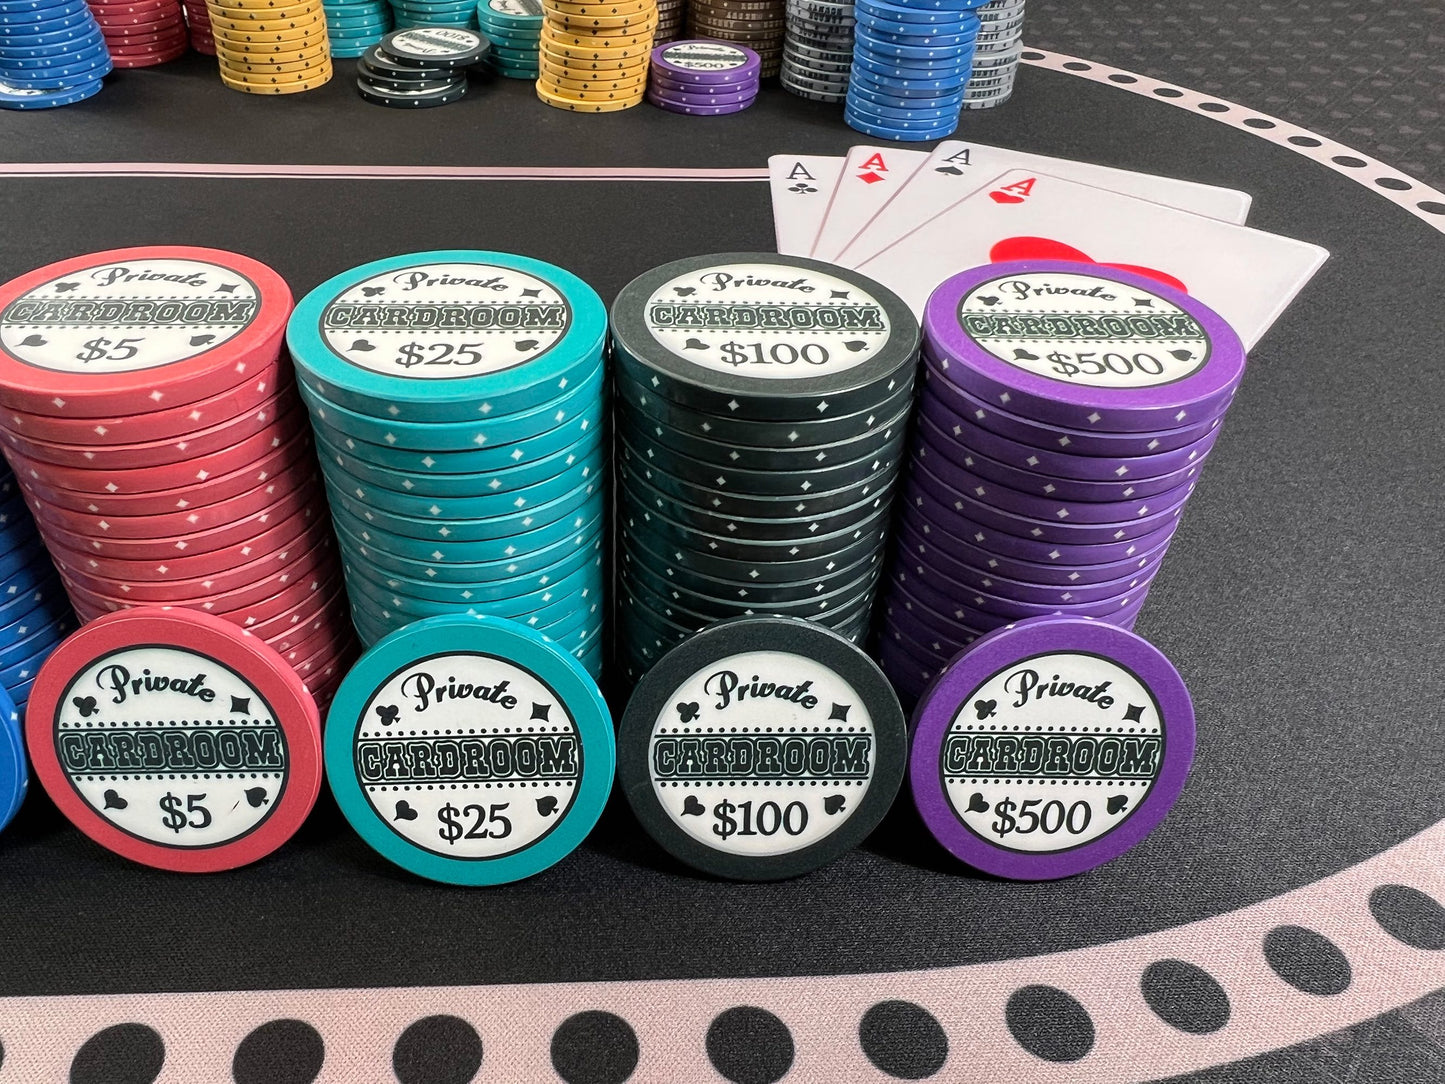 Private Cardroom Poker Chips [39mm]